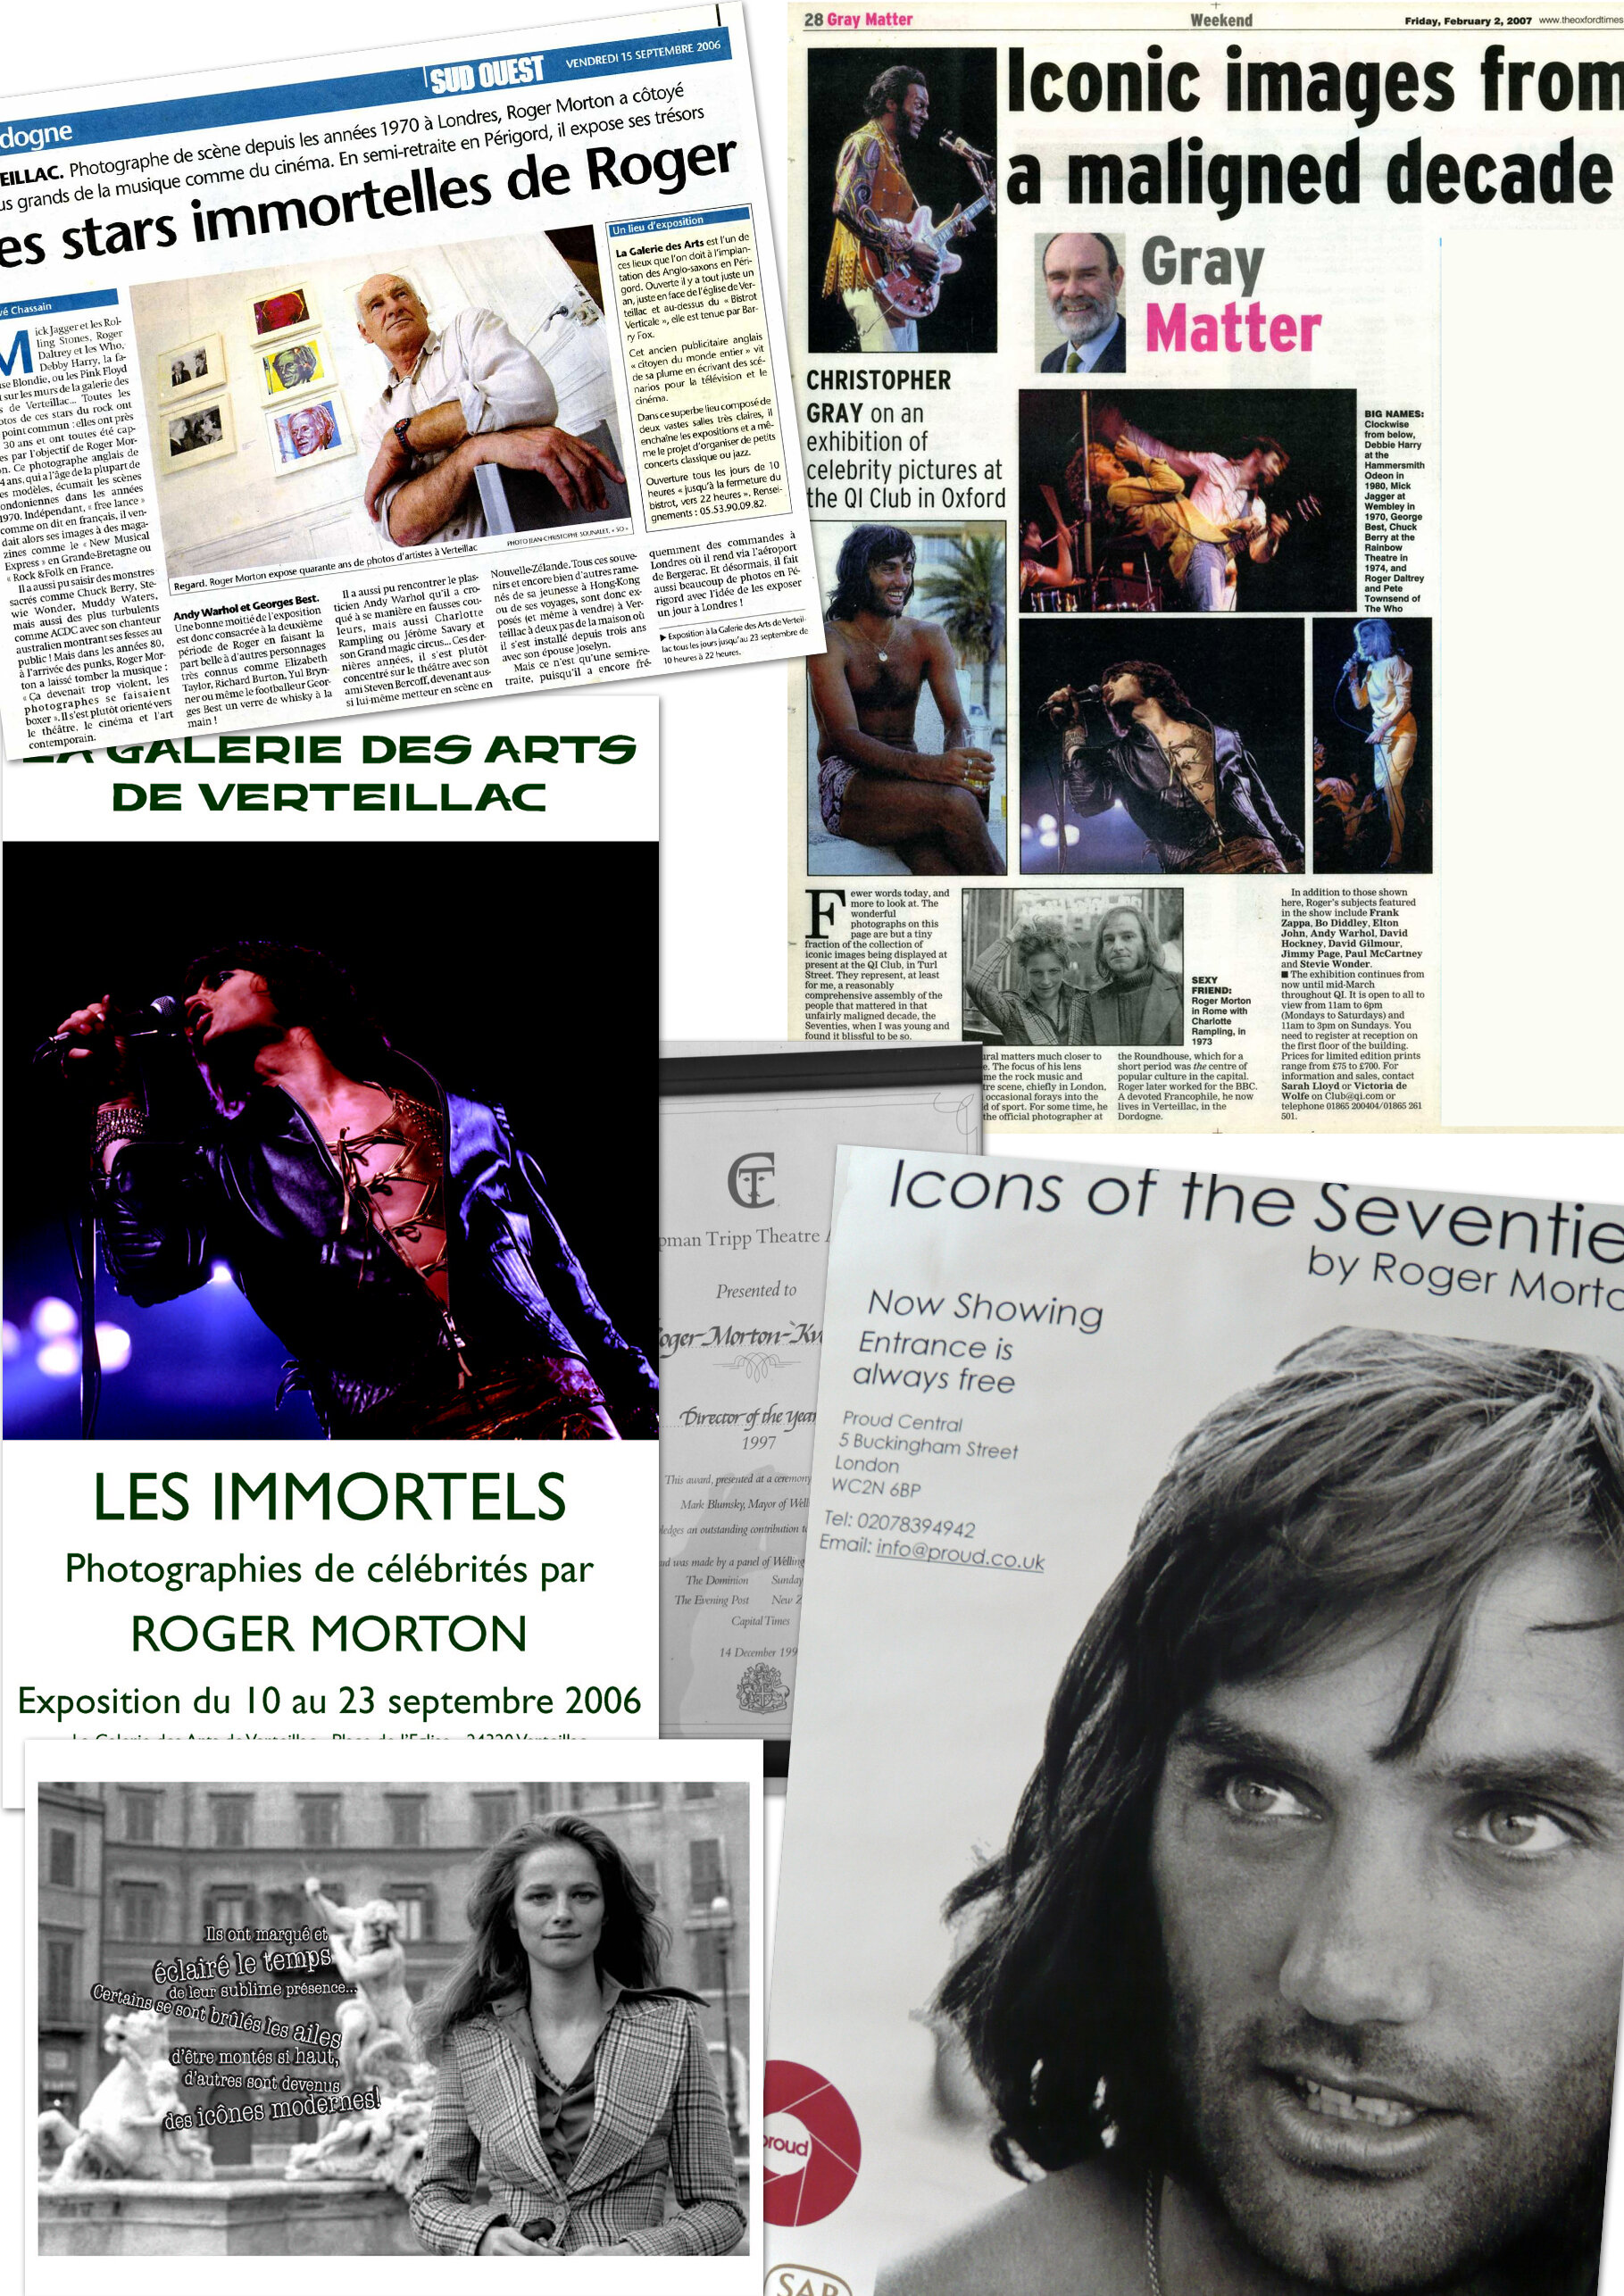 A montage of previous publicity for Roger Morton's work.